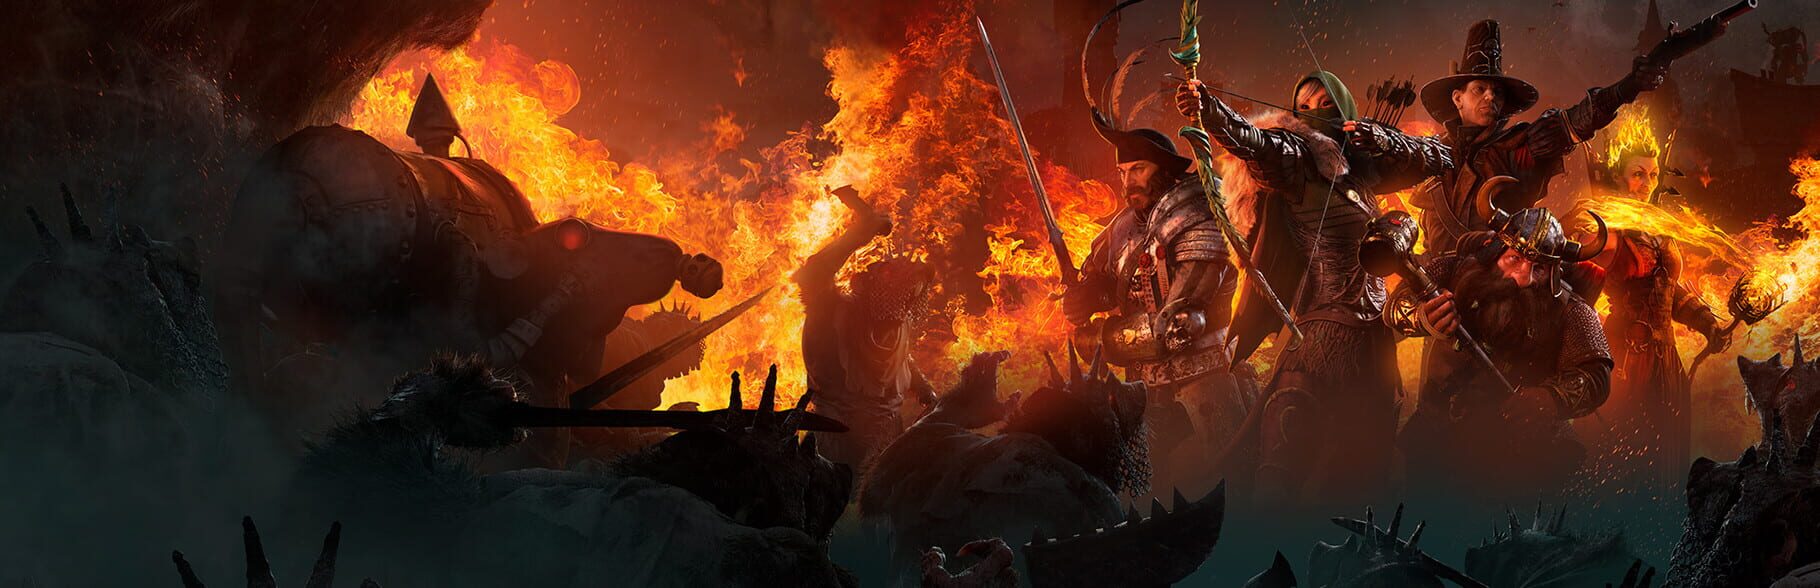 Artwork for Warhammer: End Times - Vermintide